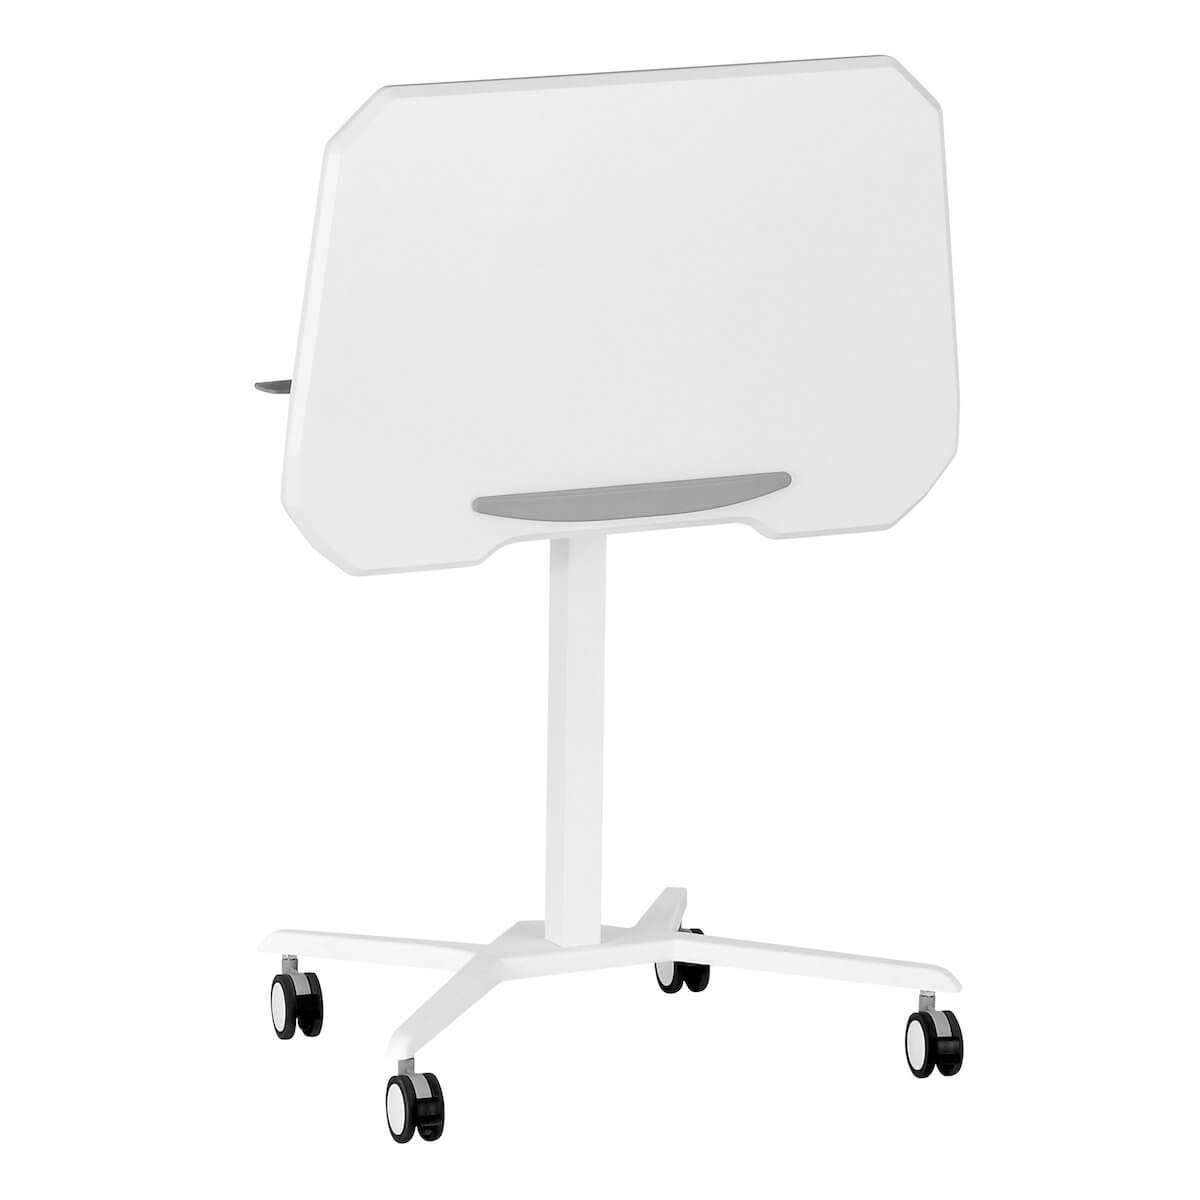 Techni Mobili White Sit to Stand Mobile Laptop Computer Stand with Height Adjustable and Tiltable Tabletop RTA-B008-WHT Angle